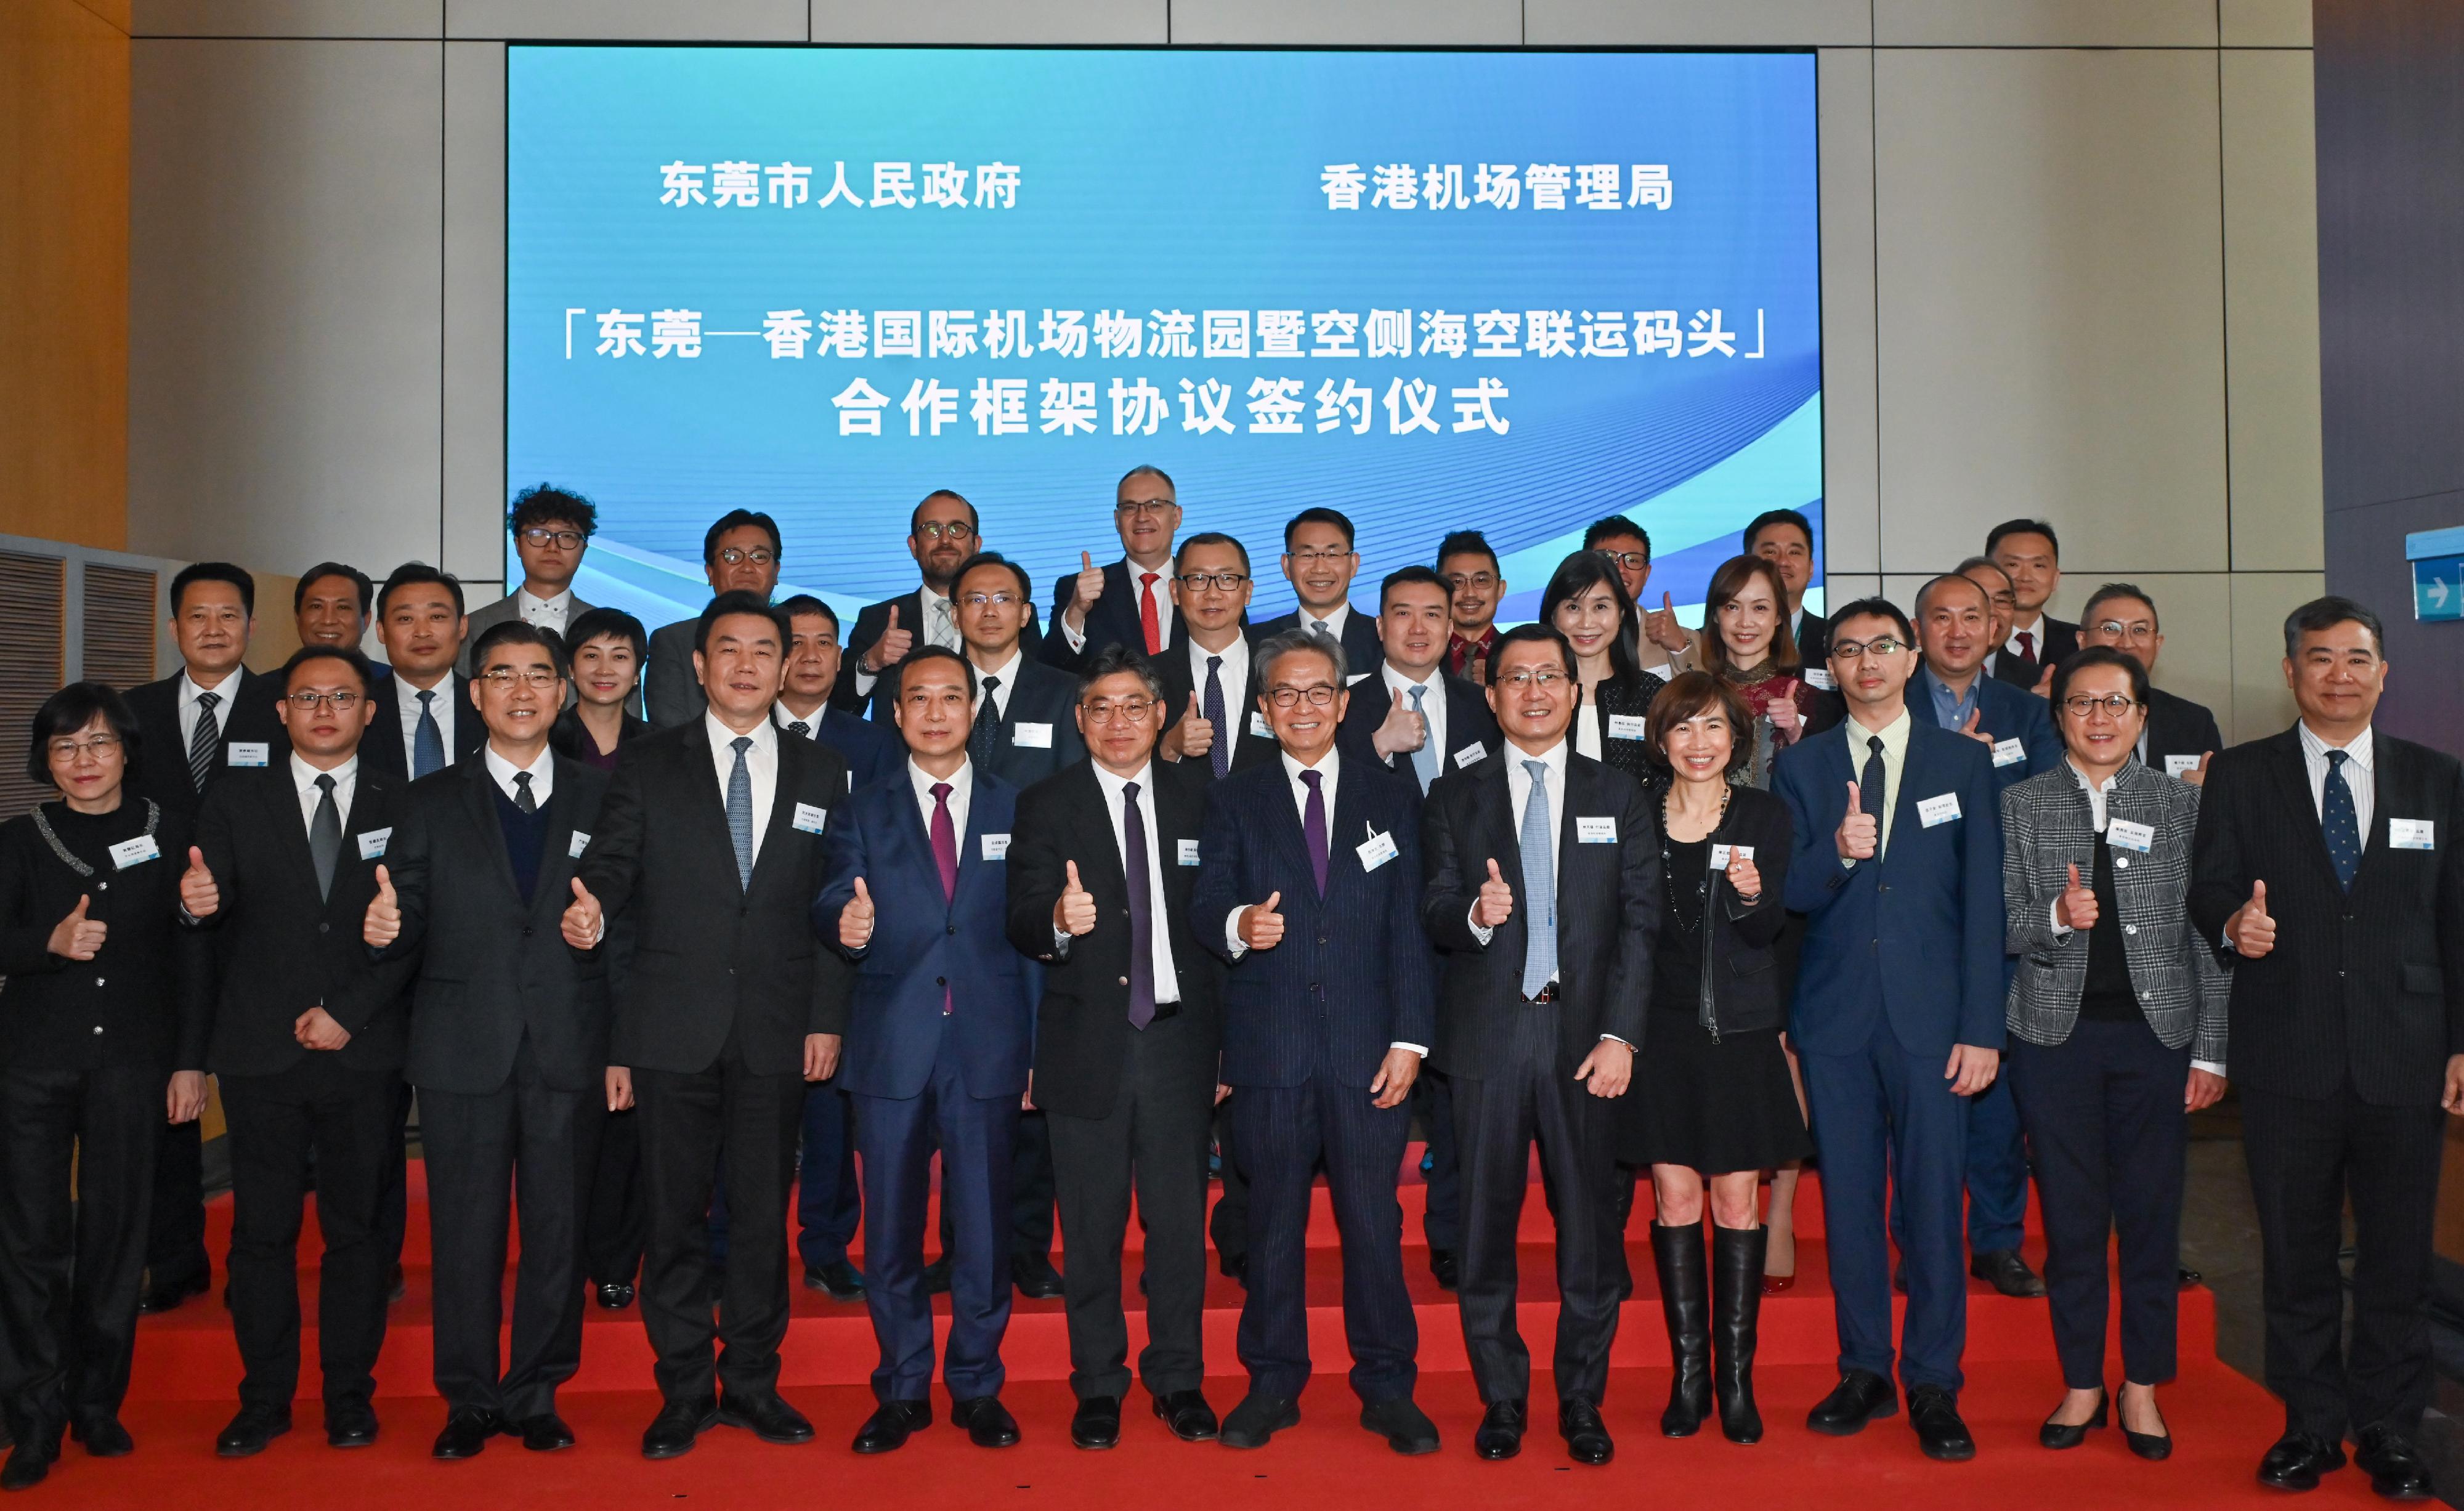 The Airport Authority Hong Kong and the Dongguan Municipal Government today (February 16) signed a co-operation framework agreement to implement and foster the long-term development of the "sea-air intermodal cargo transshipment" mode between the two cities. Photo shows the Secretary for Transport and Logistics, Mr Lam Sai-hung (front row, sixth left), with the Dongguan Municipal People's Government delegation and other guests after the signing ceremony.